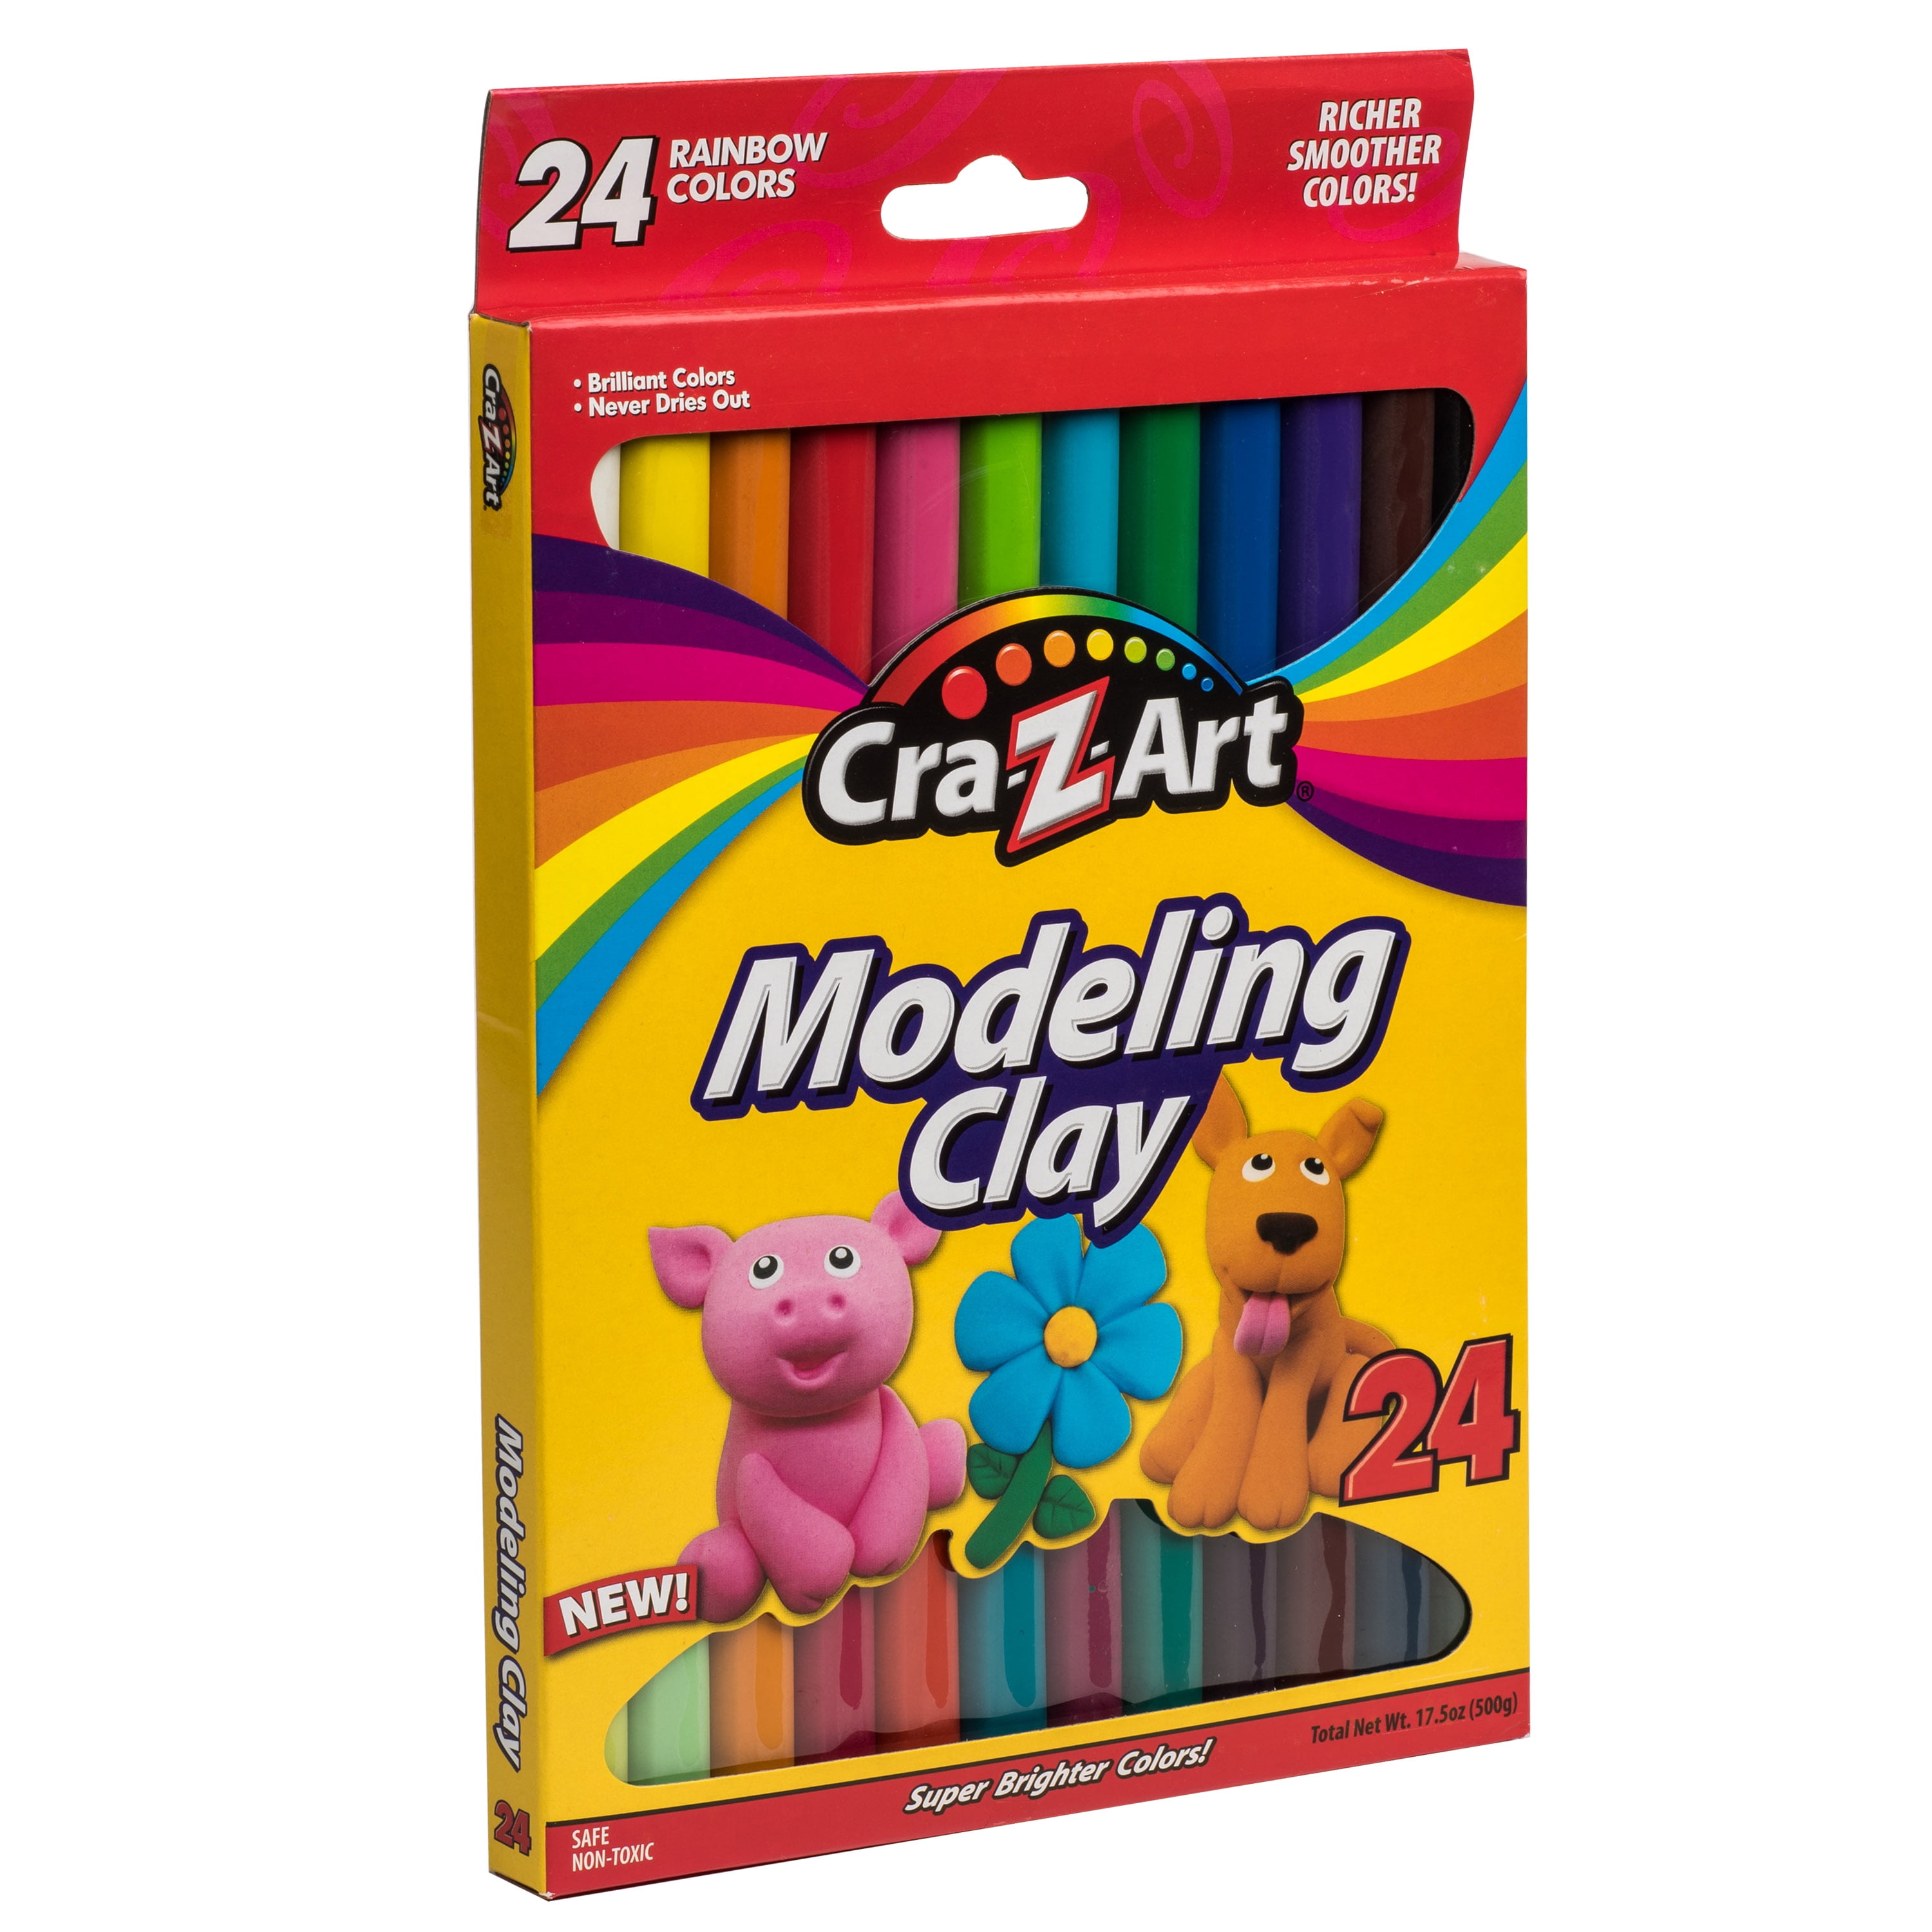 where can you get modeling clay